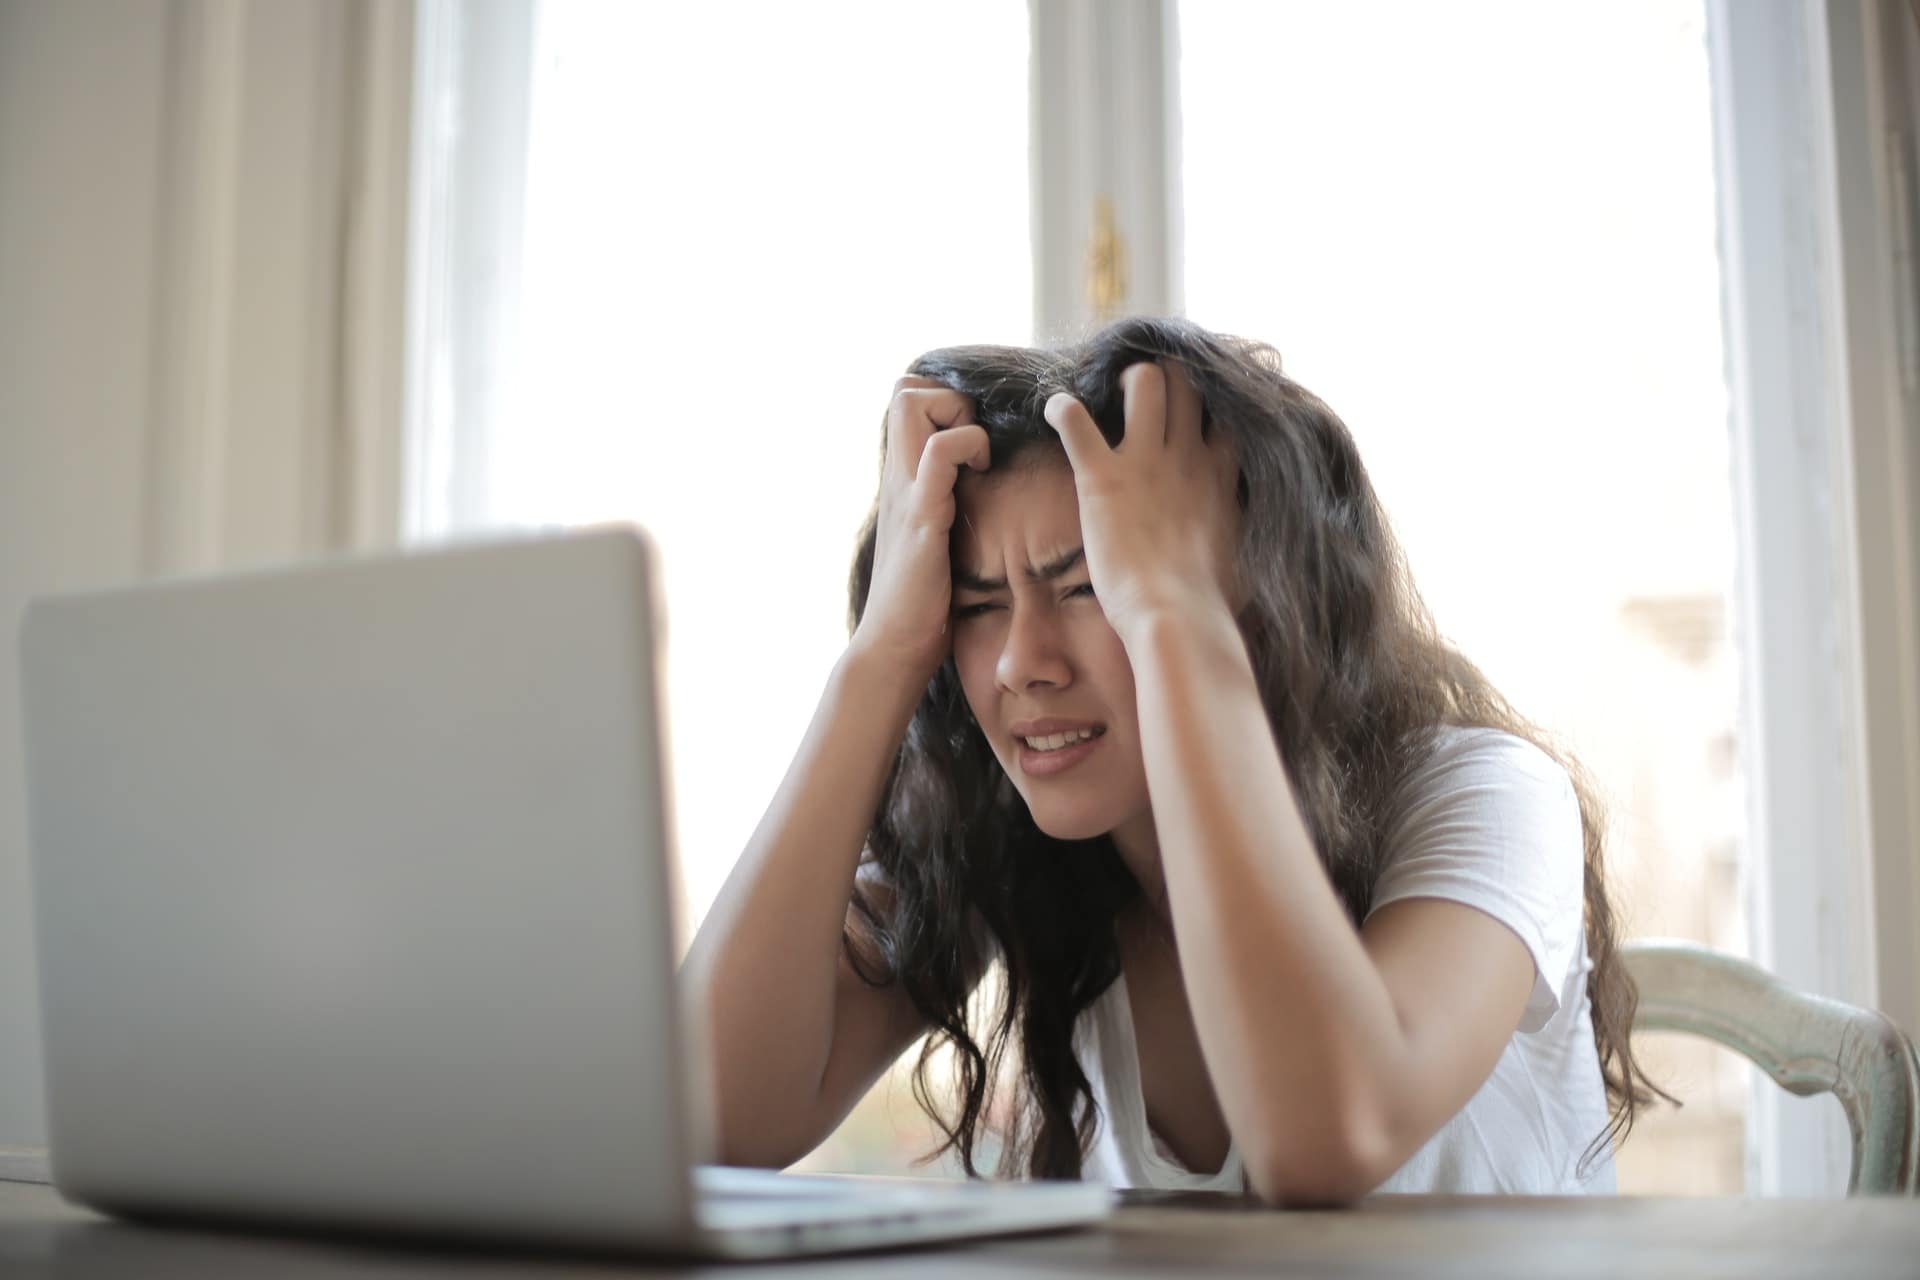 A woman looking at her laptop with a confused look on her face while holding her head in her hands, she is sitting at a desk.